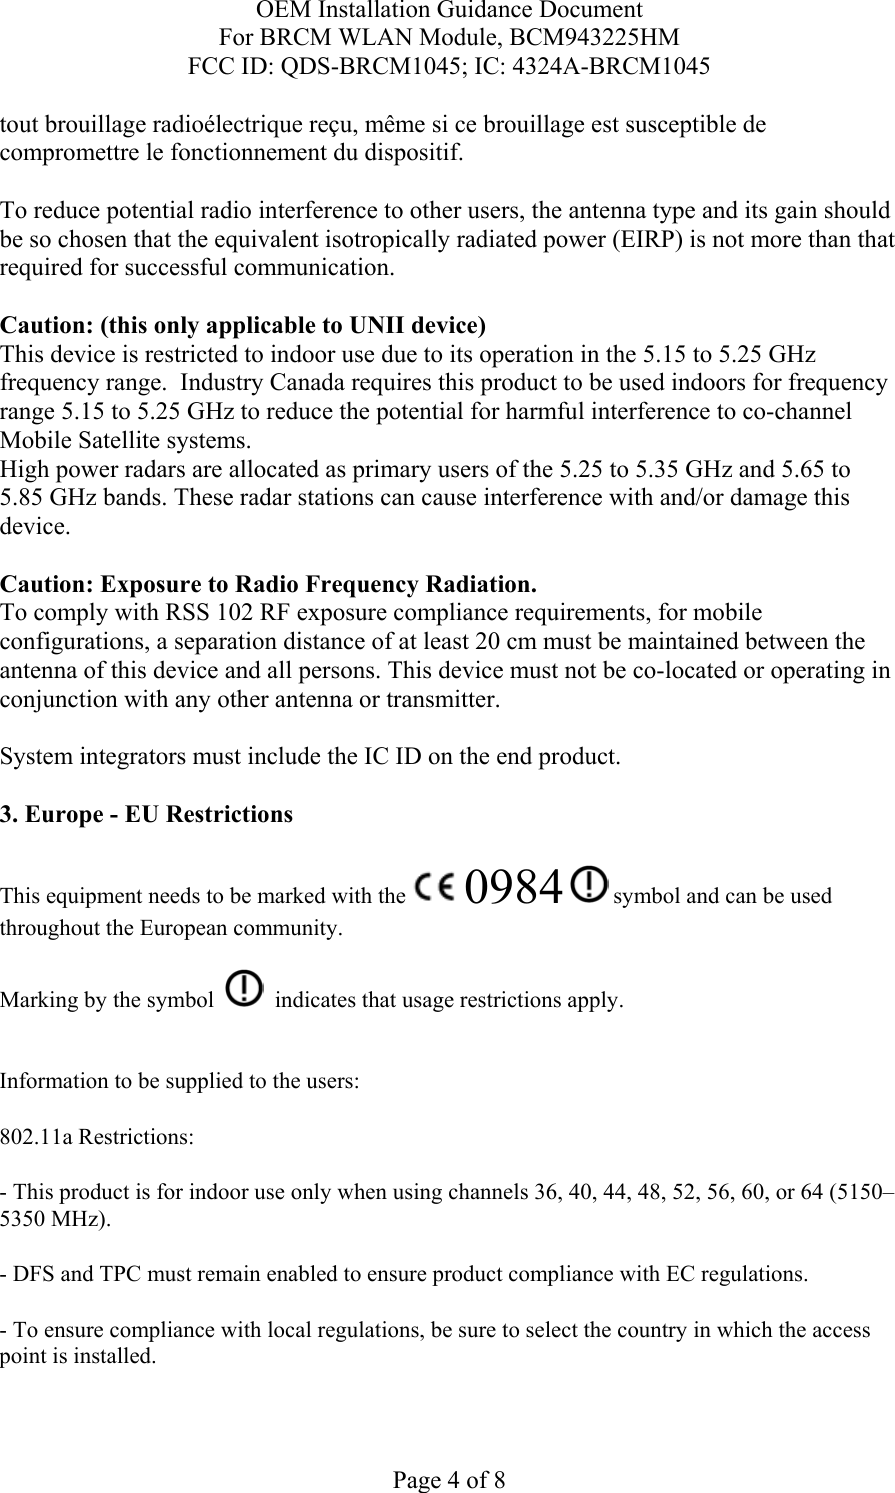 OEM Installation Guidance Document For BRCM WLAN Module, BCM943225HM FCC ID: QDS-BRCM1045; IC: 4324A-BRCM1045  Page 4 of 8 tout brouillage radioélectrique reçu, même si ce brouillage est susceptible de compromettre le fonctionnement du dispositif.  To reduce potential radio interference to other users, the antenna type and its gain should be so chosen that the equivalent isotropically radiated power (EIRP) is not more than that required for successful communication.  Caution: (this only applicable to UNII device) This device is restricted to indoor use due to its operation in the 5.15 to 5.25 GHz frequency range.  Industry Canada requires this product to be used indoors for frequency range 5.15 to 5.25 GHz to reduce the potential for harmful interference to co-channel Mobile Satellite systems. High power radars are allocated as primary users of the 5.25 to 5.35 GHz and 5.65 to 5.85 GHz bands. These radar stations can cause interference with and/or damage this device.  Caution: Exposure to Radio Frequency Radiation. To comply with RSS 102 RF exposure compliance requirements, for mobile configurations, a separation distance of at least 20 cm must be maintained between the antenna of this device and all persons. This device must not be co-located or operating in conjunction with any other antenna or transmitter.  System integrators must include the IC ID on the end product.   3. Europe - EU Restrictions This equipment needs to be marked with the   0984  symbol and can be used throughout the European community.  Marking by the symbol     indicates that usage restrictions apply.  Information to be supplied to the users: 802.11a Restrictions: - This product is for indoor use only when using channels 36, 40, 44, 48, 52, 56, 60, or 64 (5150–5350 MHz).       - DFS and TPC must remain enabled to ensure product compliance with EC regulations.      - To ensure compliance with local regulations, be sure to select the country in which the access point is installed. 